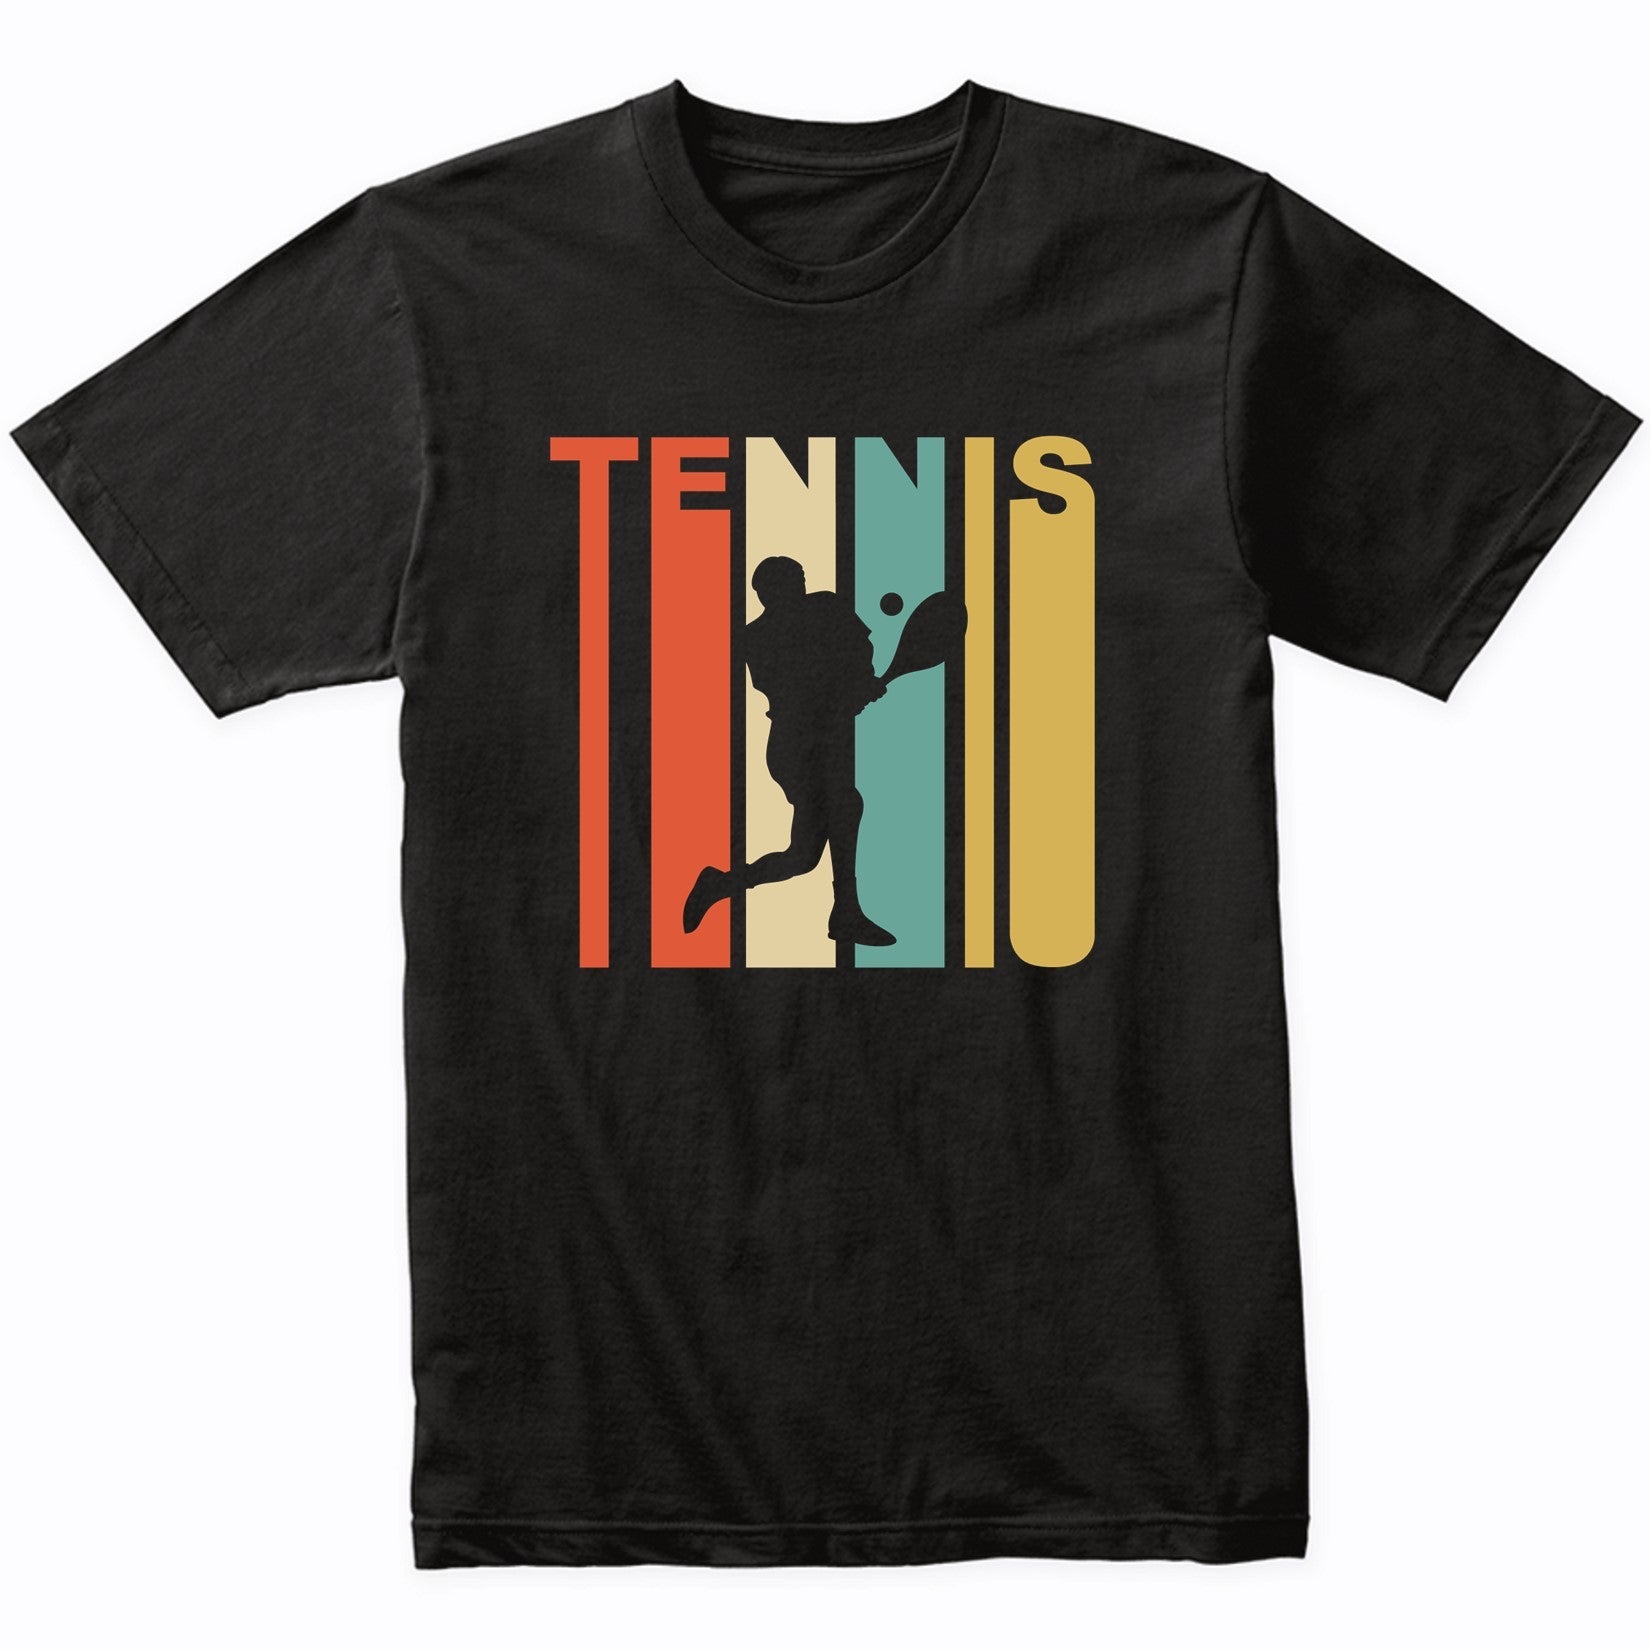 Retro 1970's Style Tennis Player Silhouette Sports T-Shirt